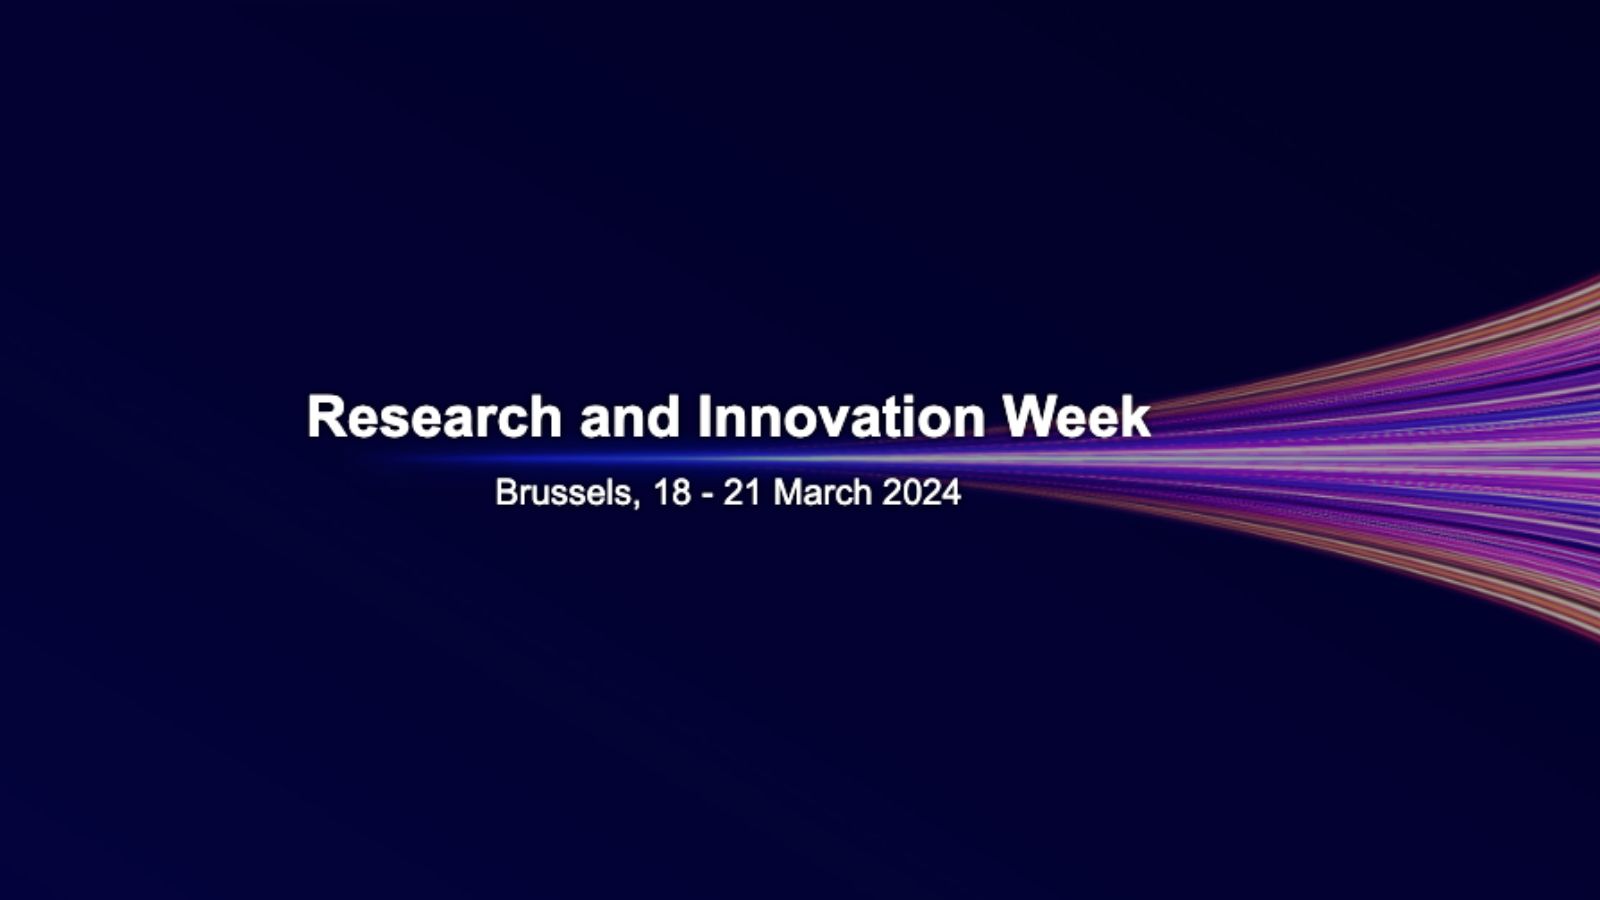 Research & Innovation Week 2024